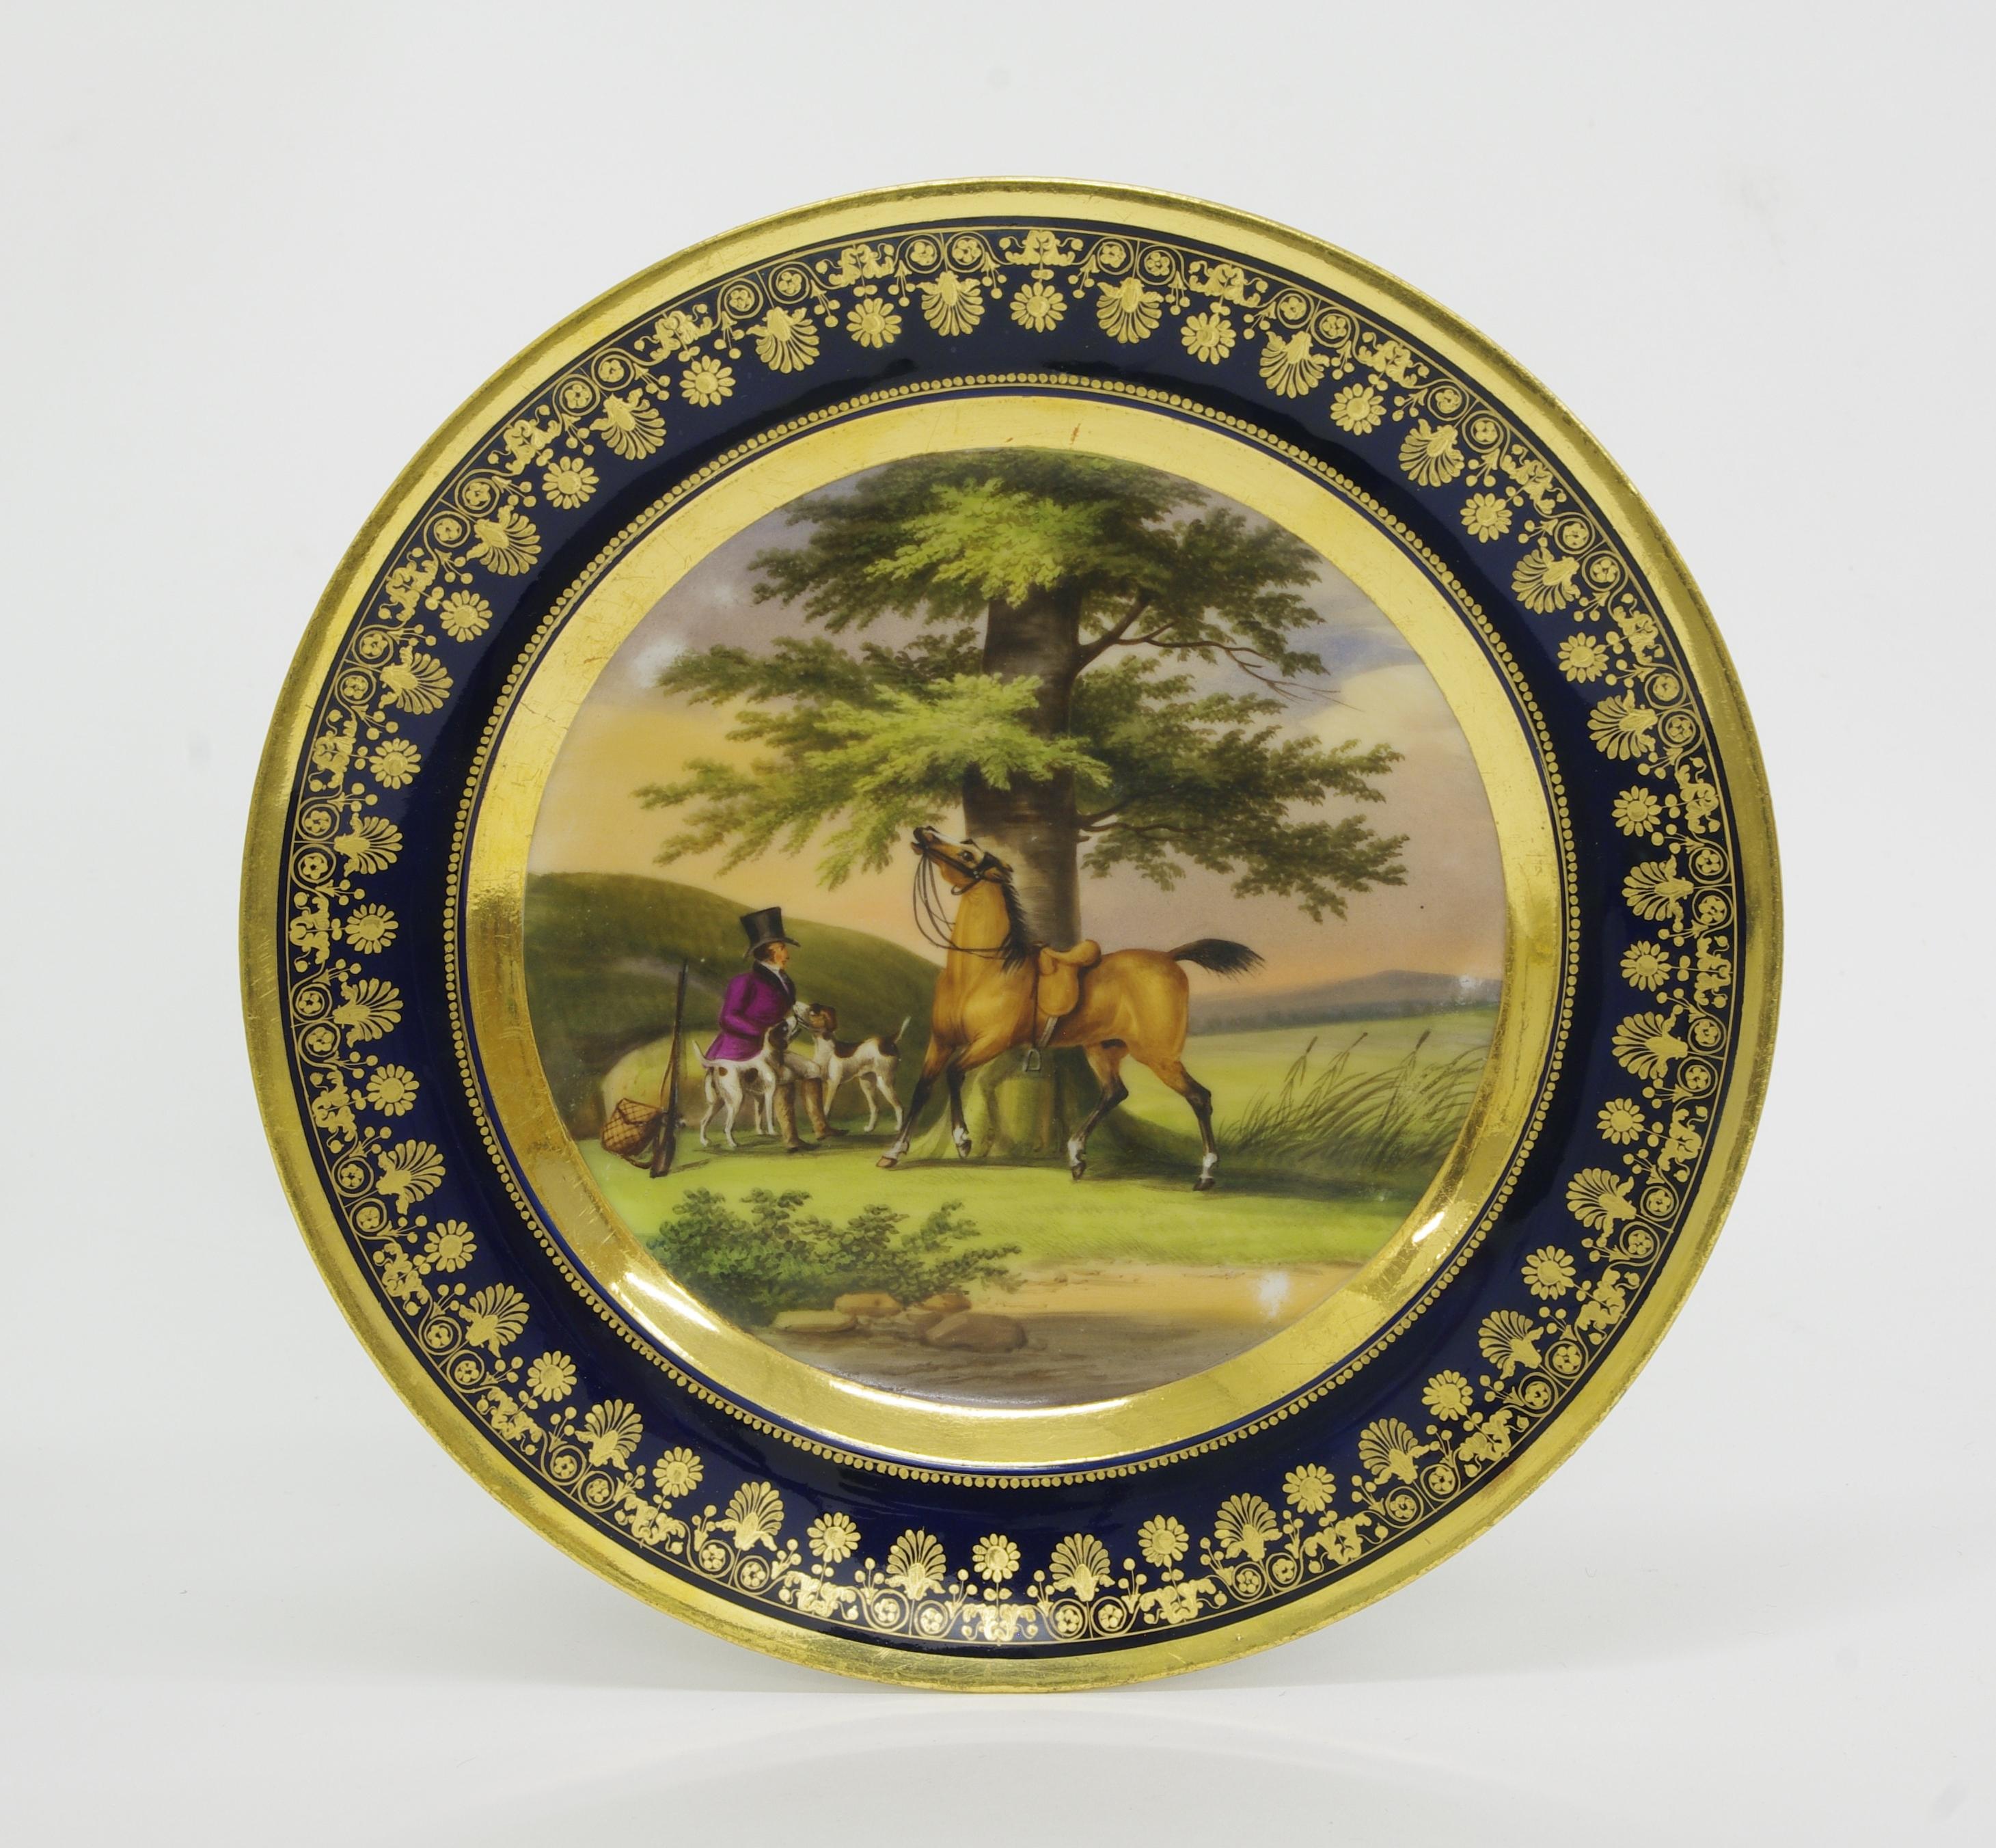 Empire Pair of Old Pairs Porcelain Cabinet Plates, circa 1820